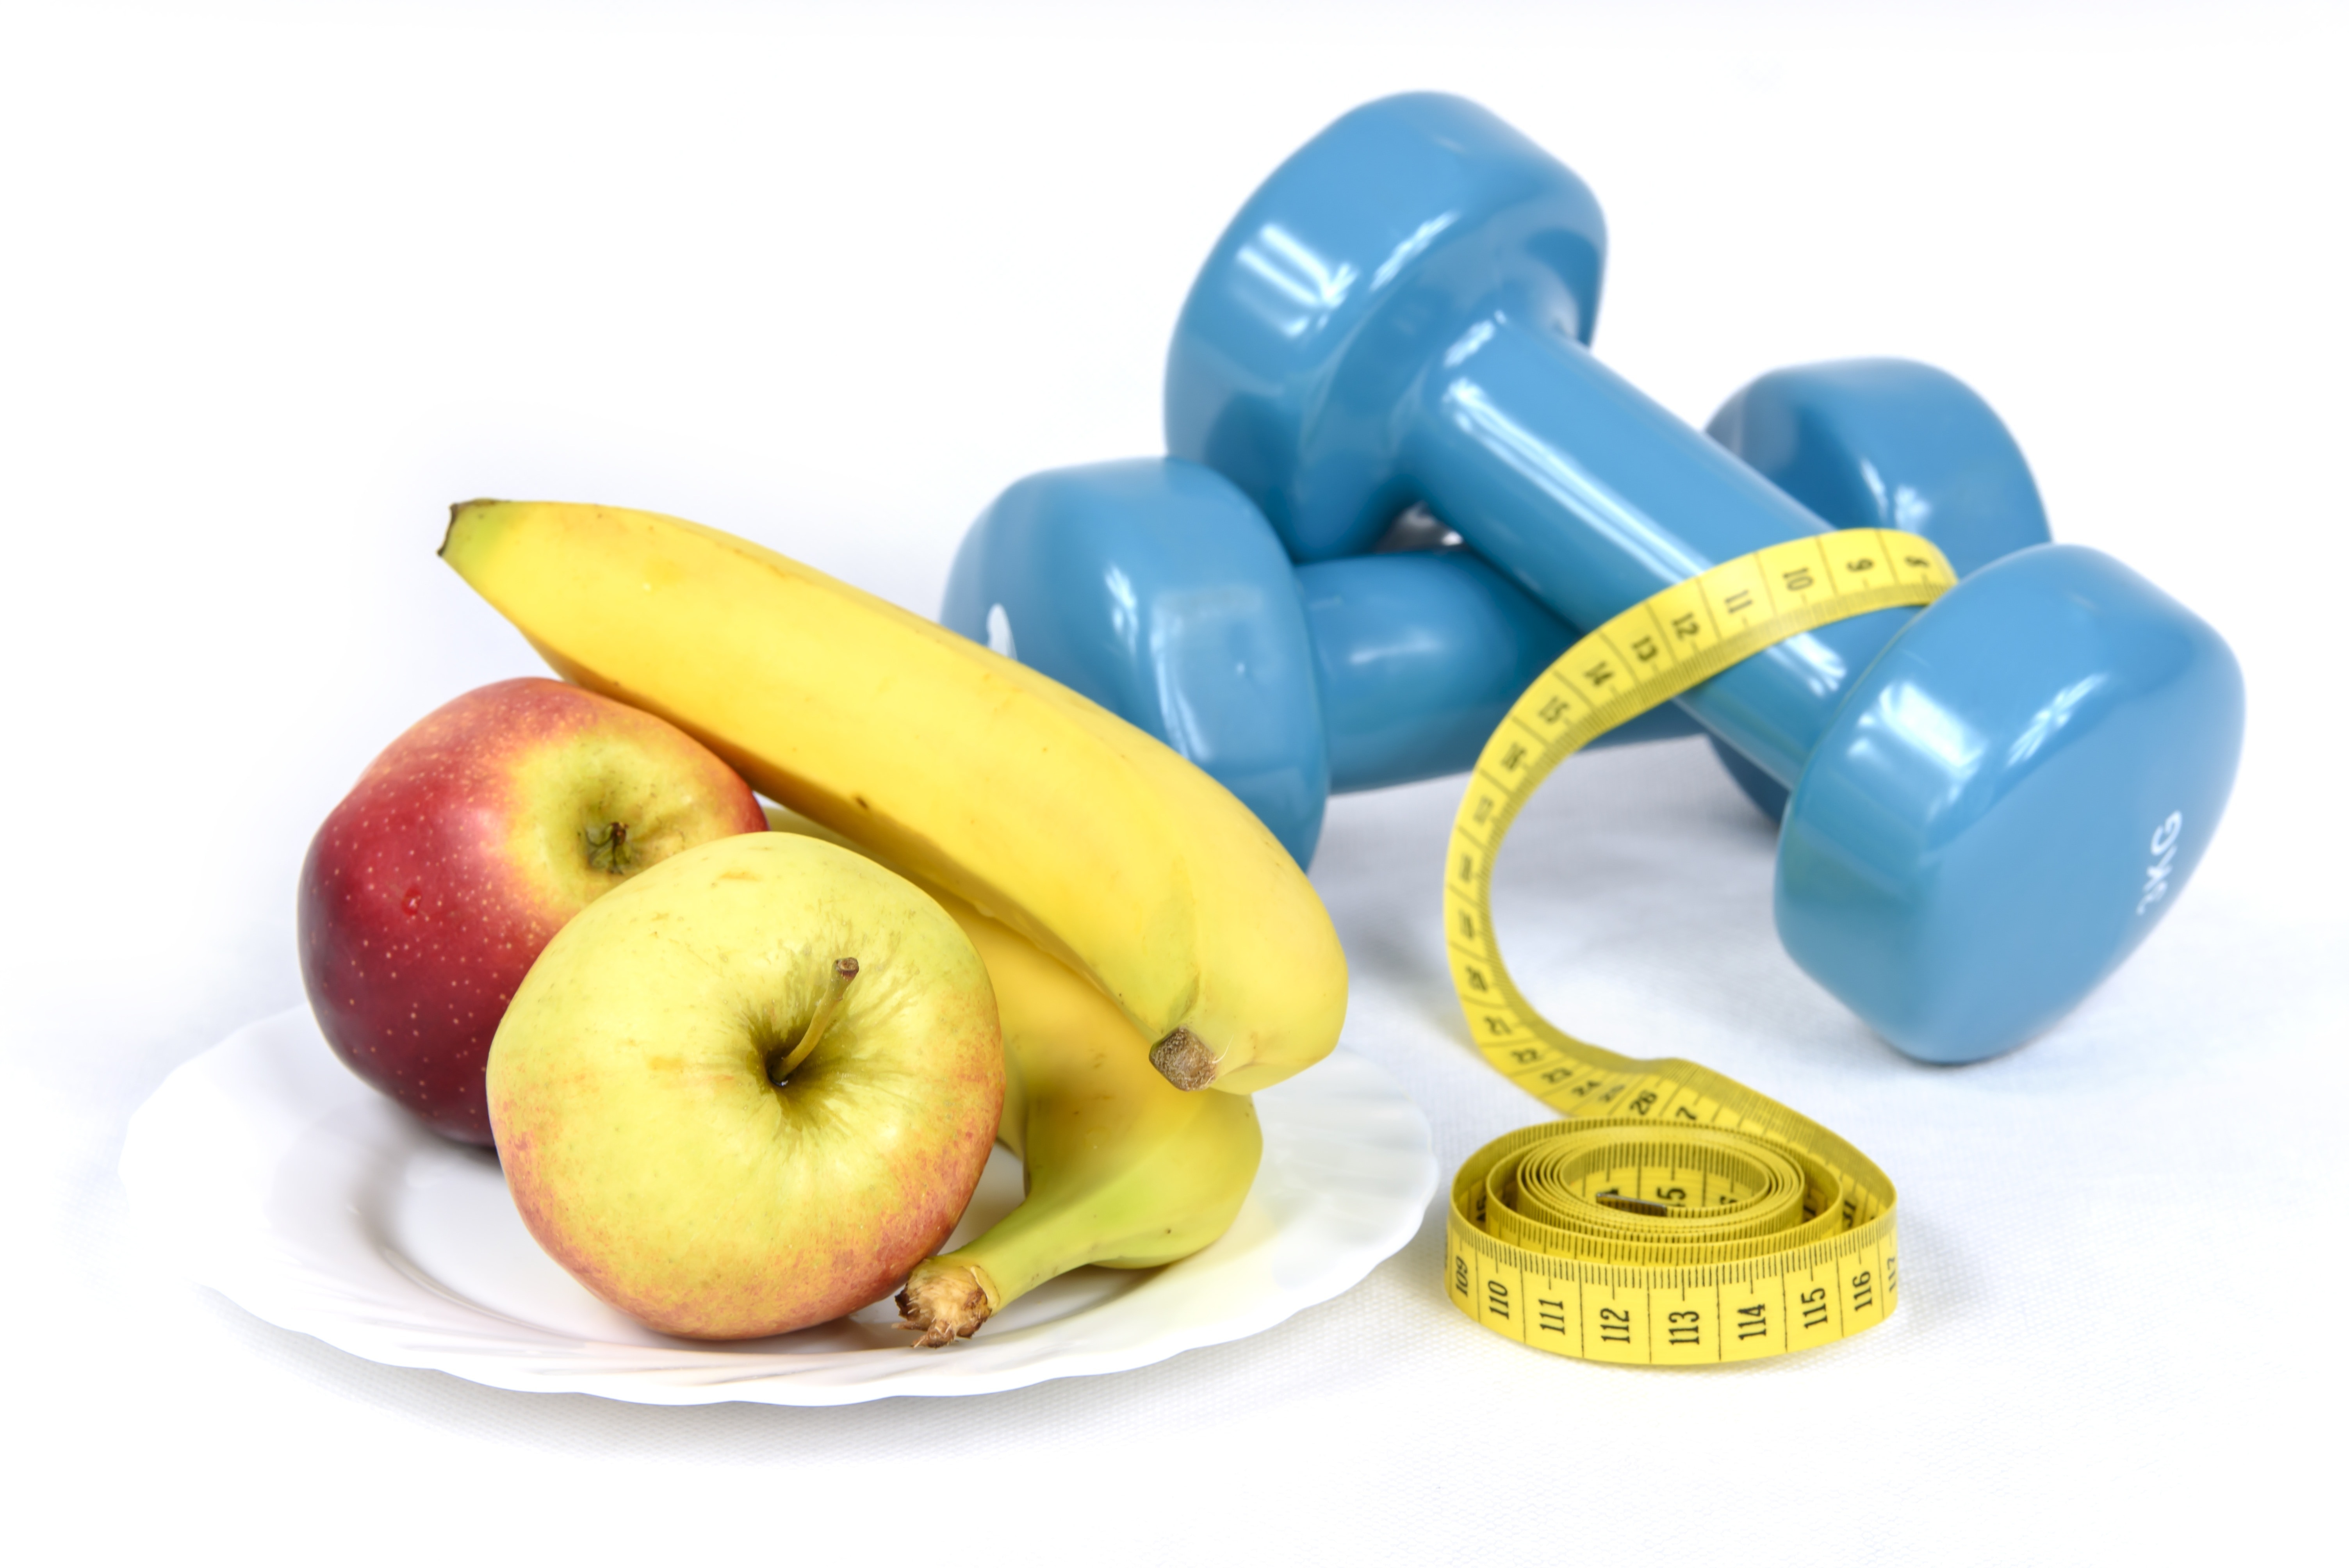 red apple and 2 yellow banana with 2 fix dumbbells